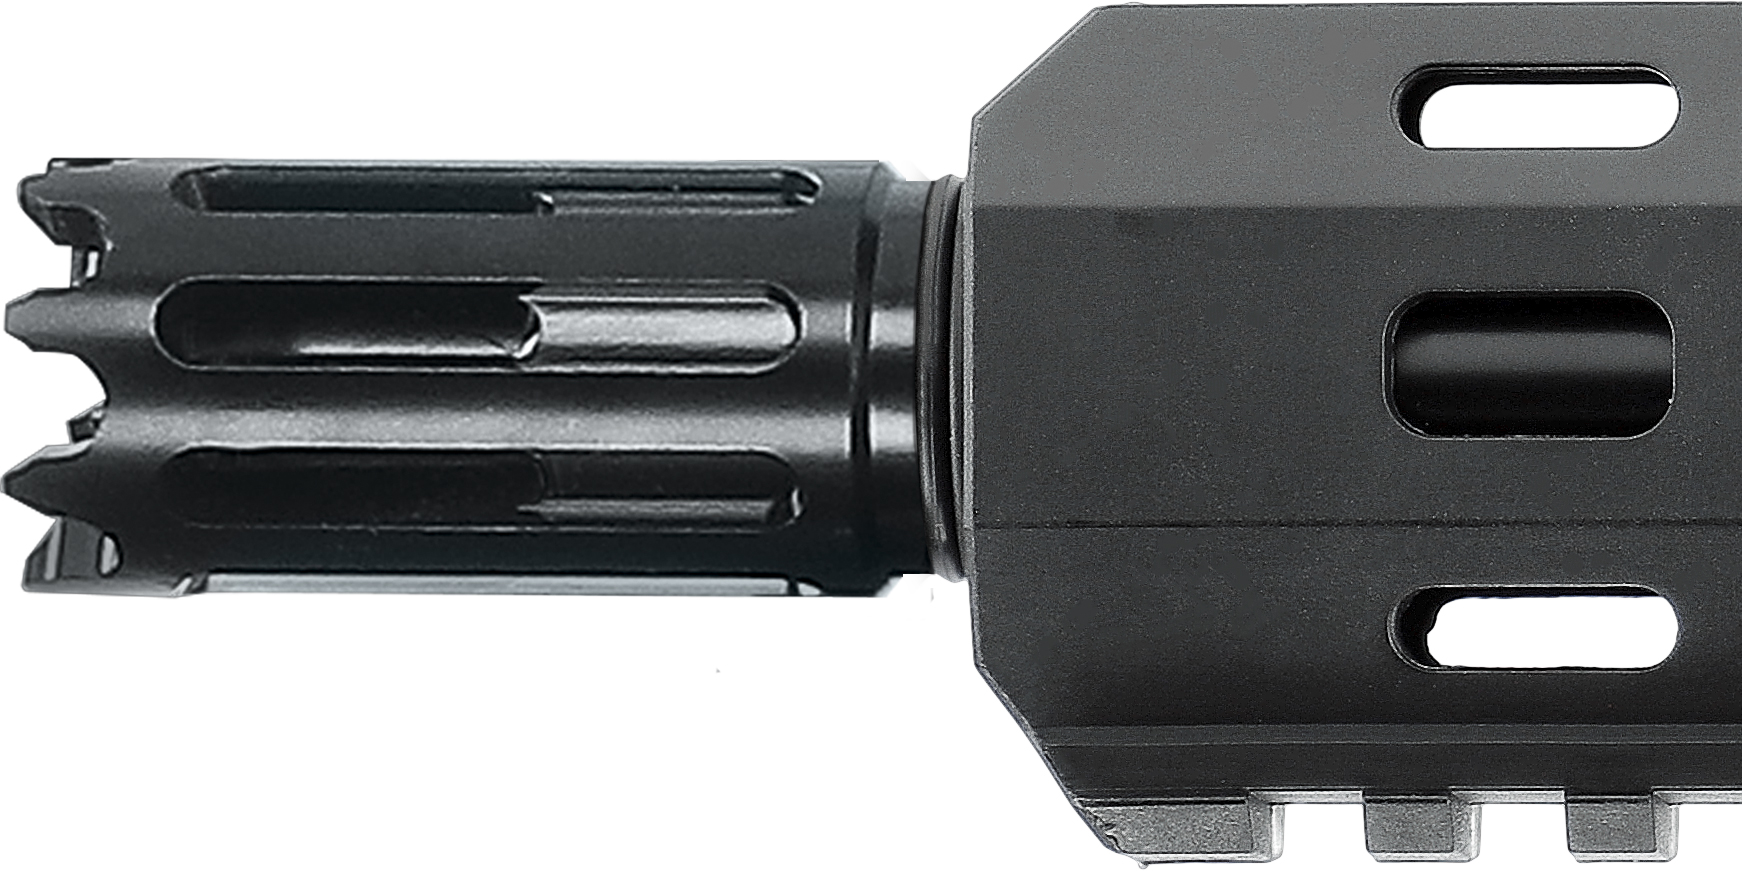 X-TENDER BARREL EXTENSION FOR T4E HDR50 AND TR50 - Wicked Store